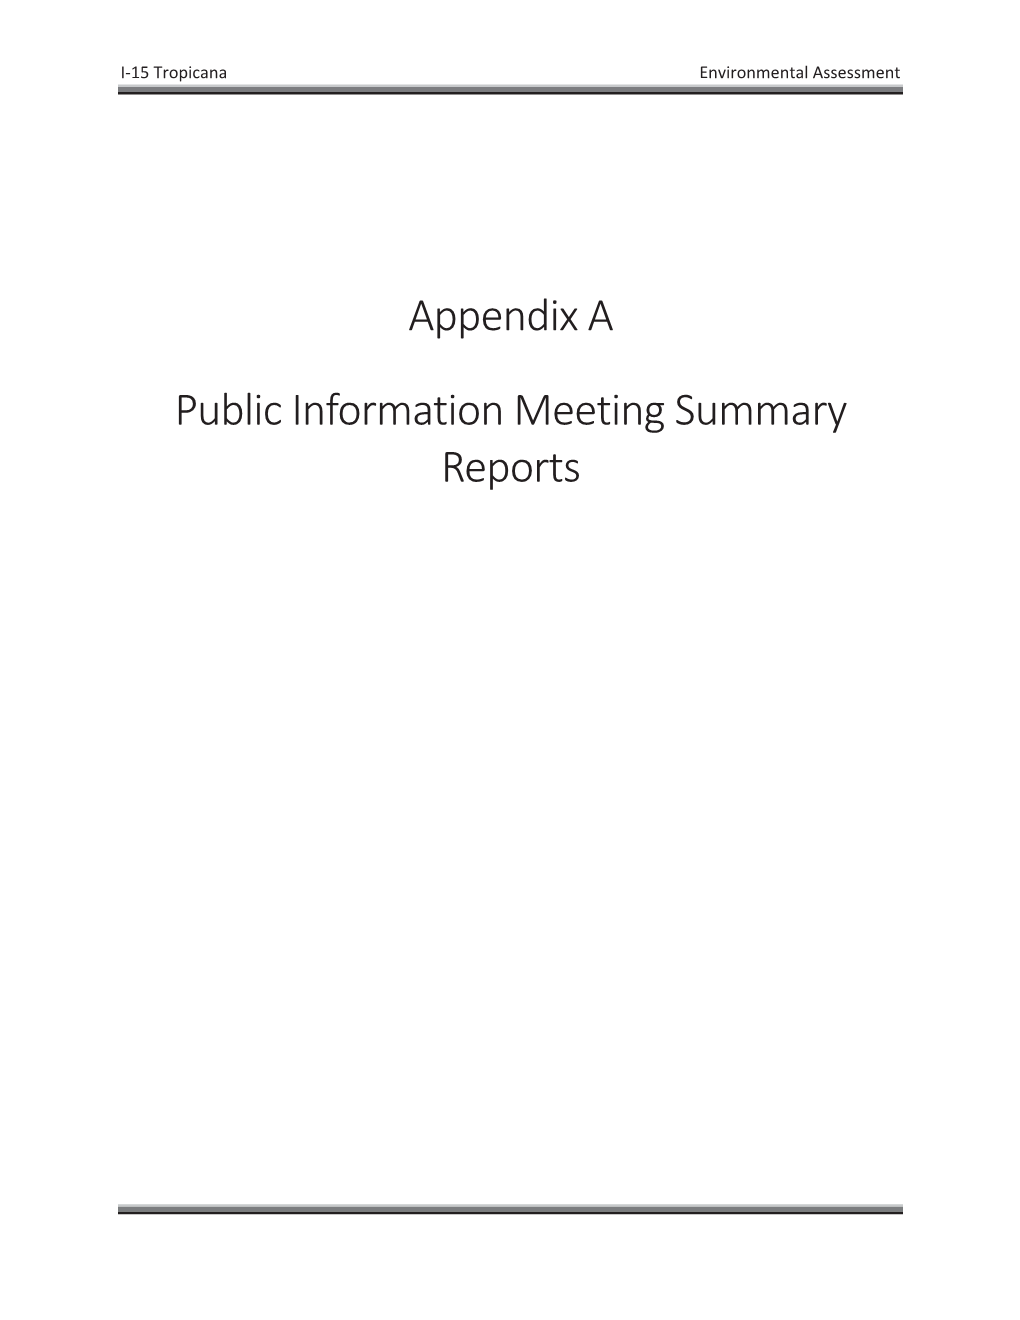 Public Information Meeting Summary Reports